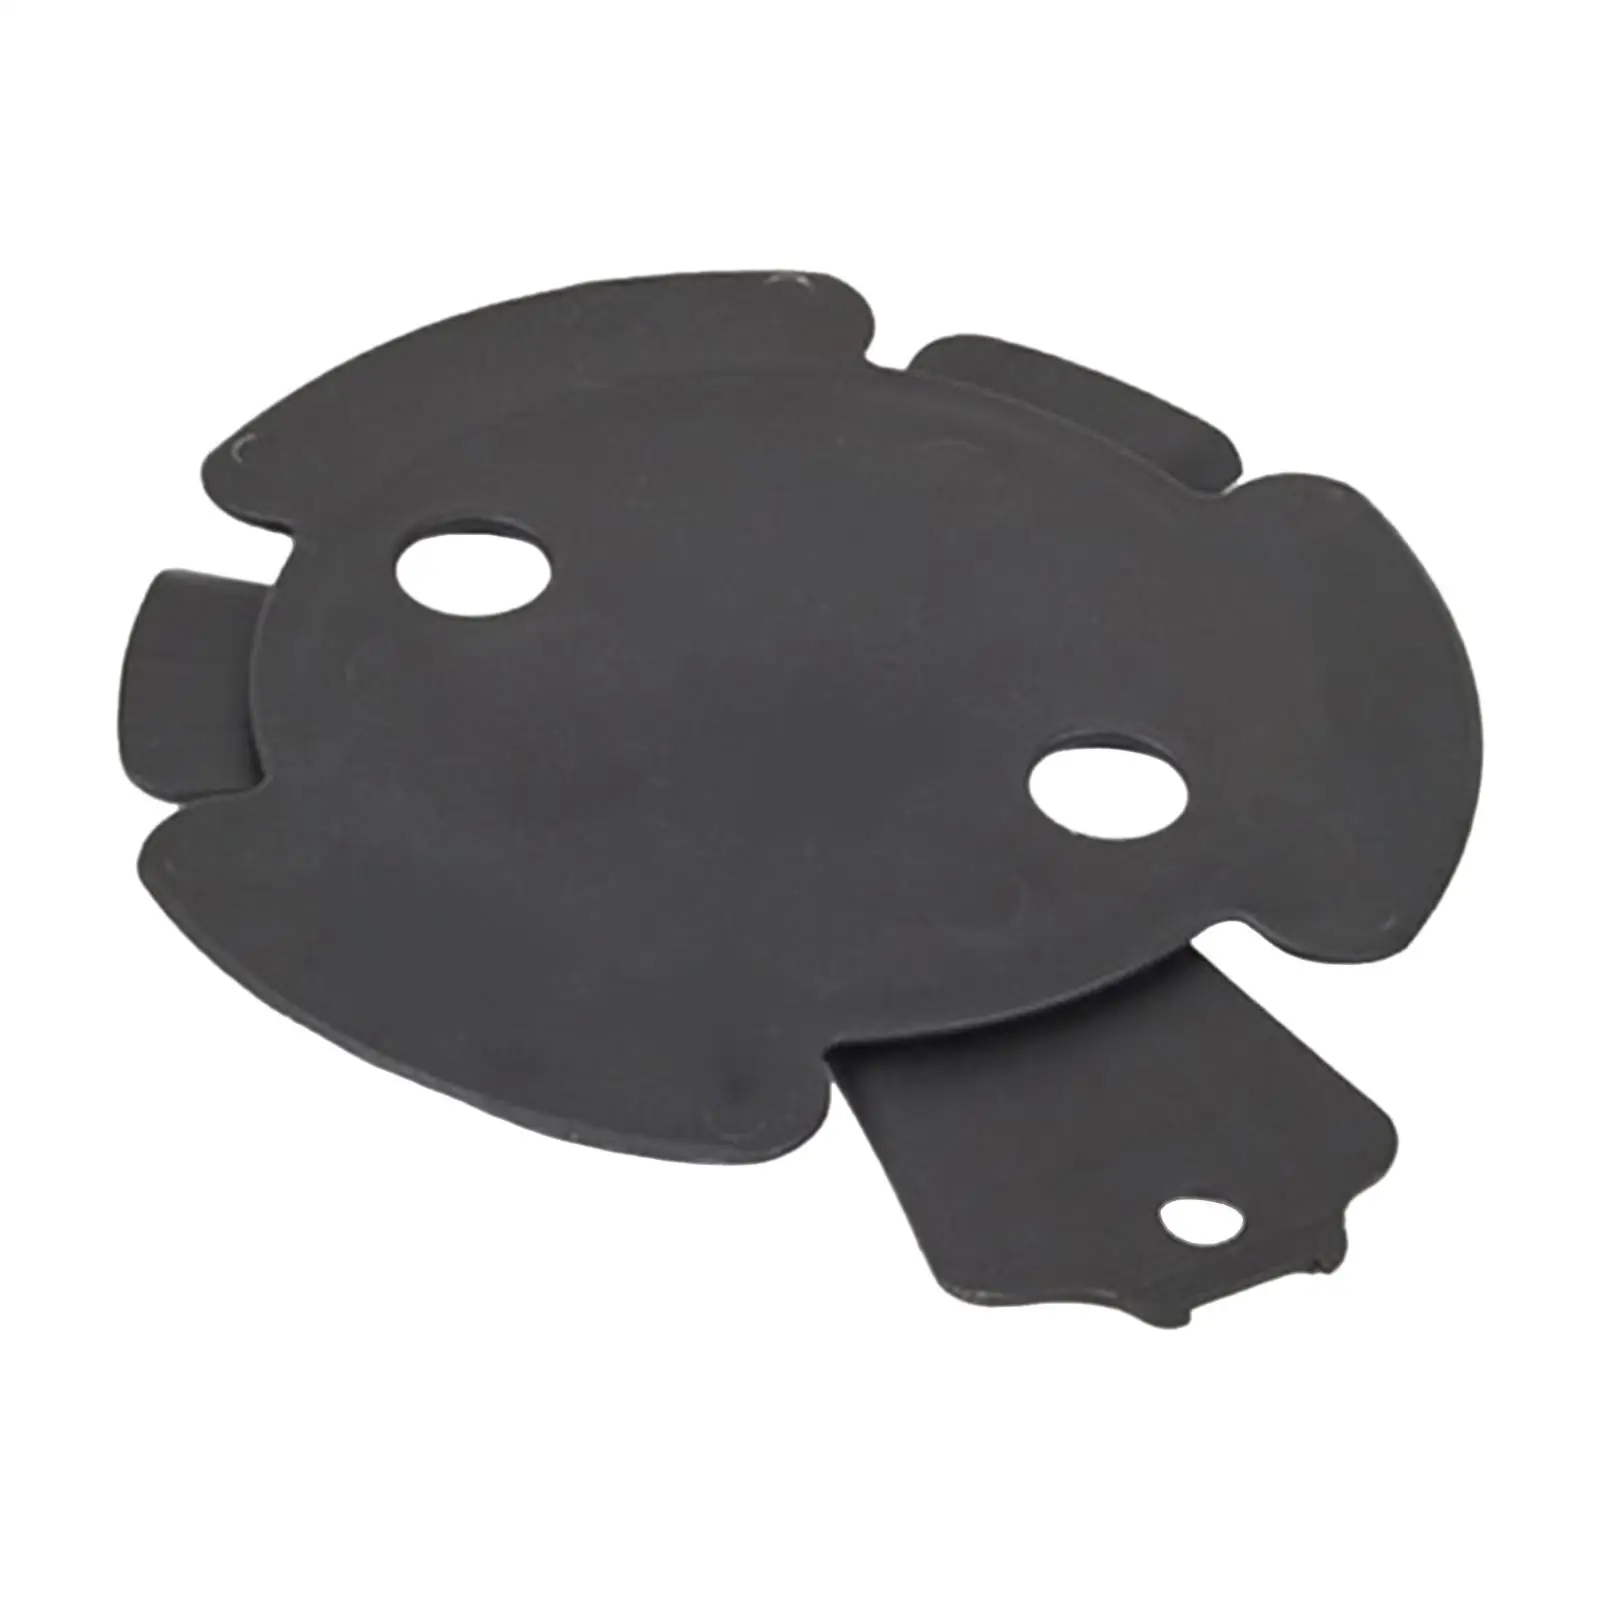 Oil Sump Underfloor Drain Cover Flap, 51757209541 Spare Parts Easy to Install